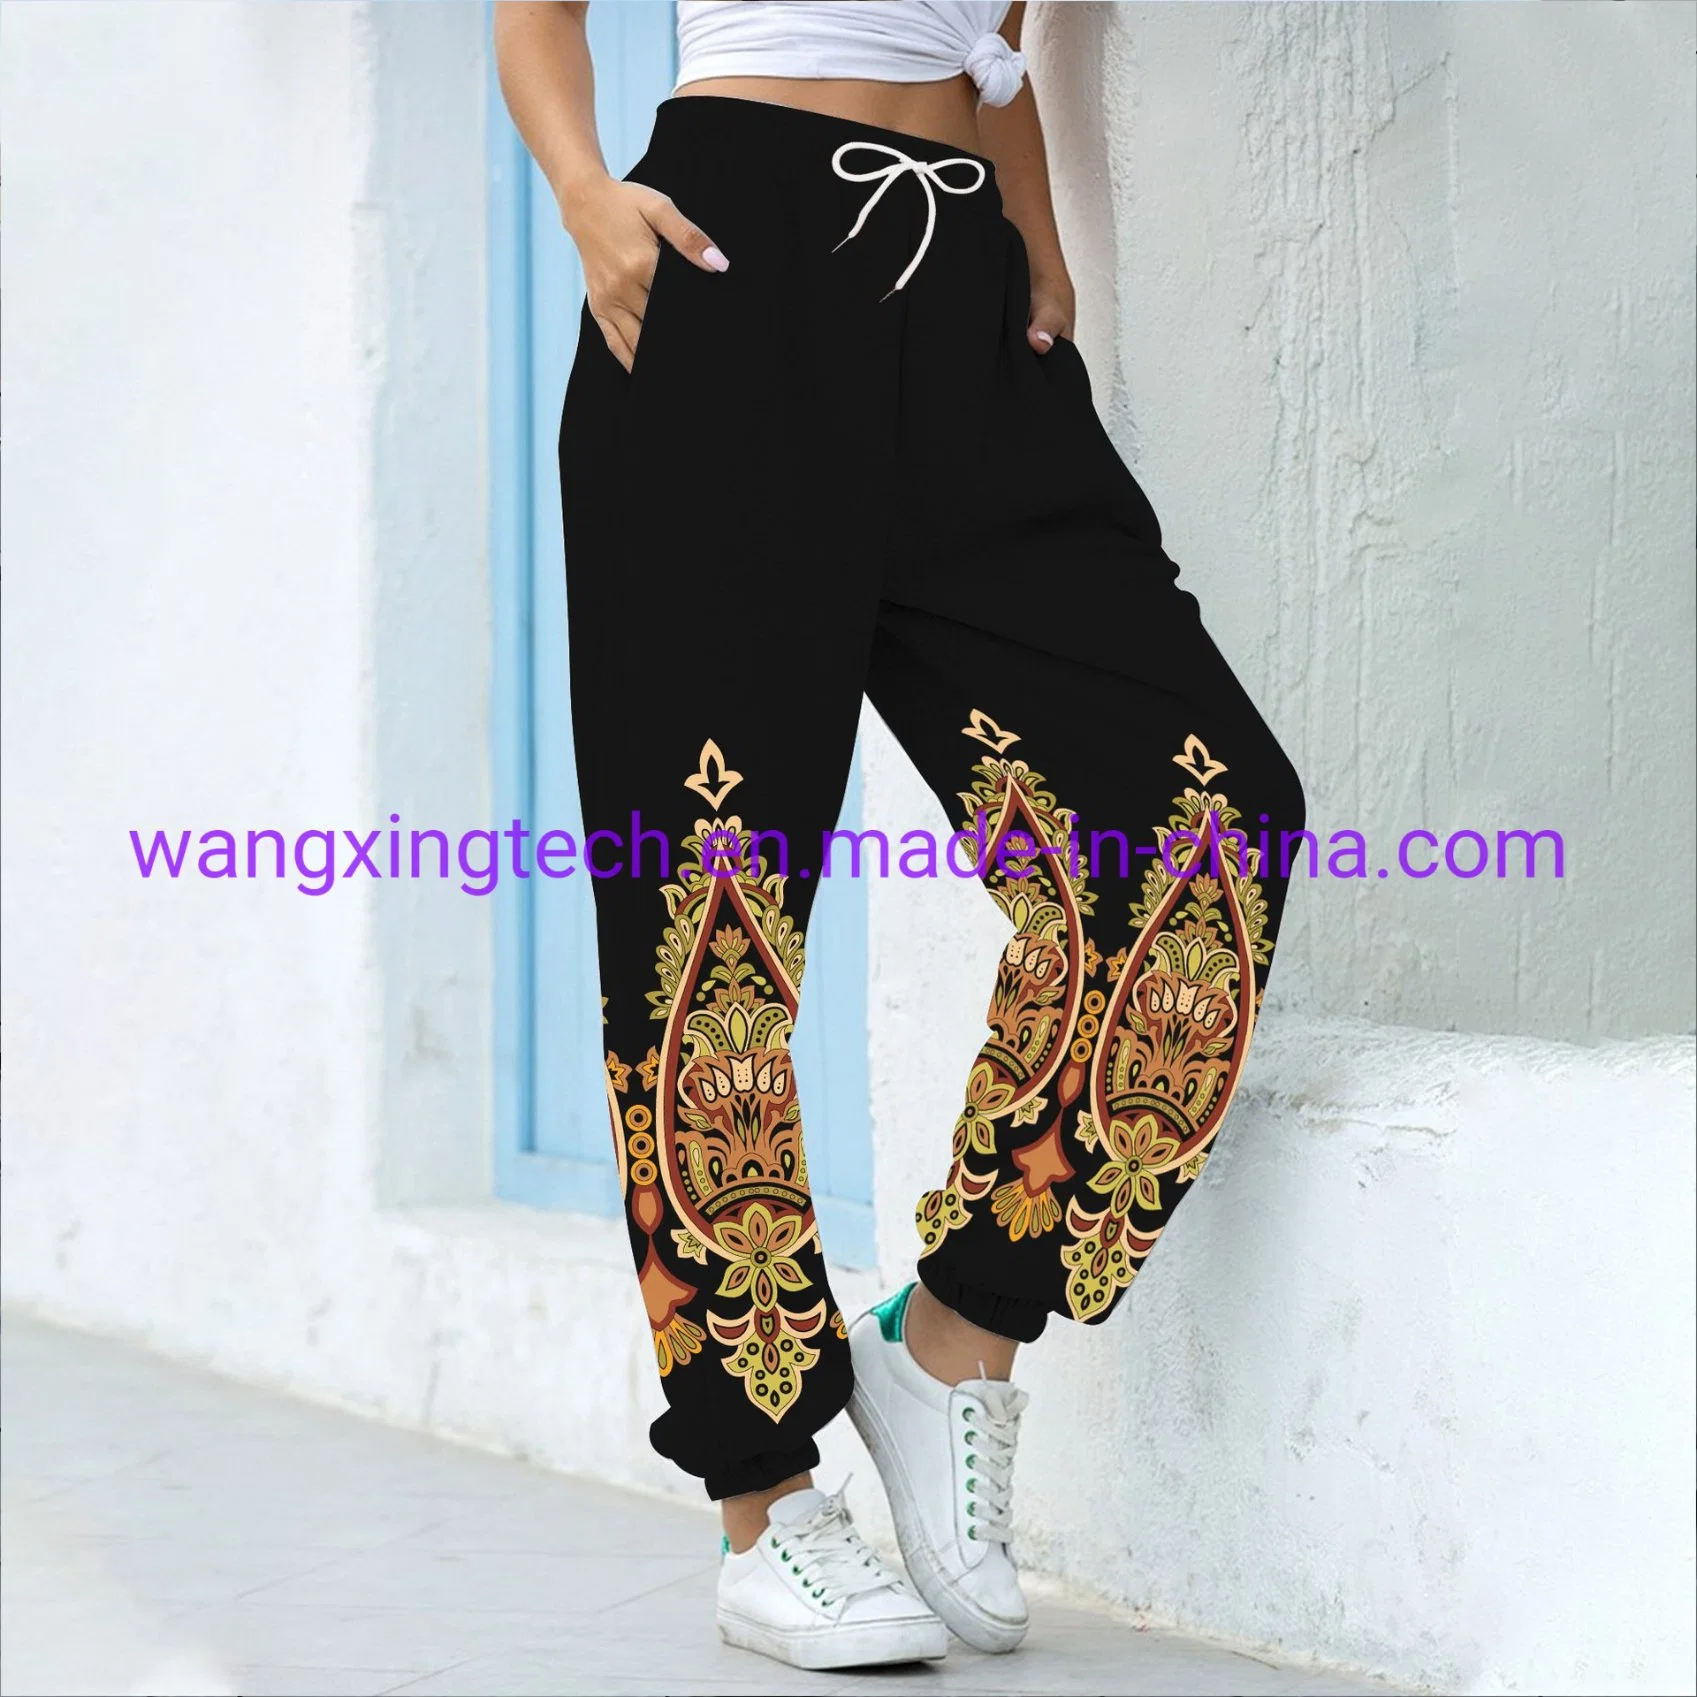 Wholesale 2022 New 3D Digital Printing Autumn and Winter Fashion Casual Sports Harem Pants Drawstring Trousers Women's Plus Size